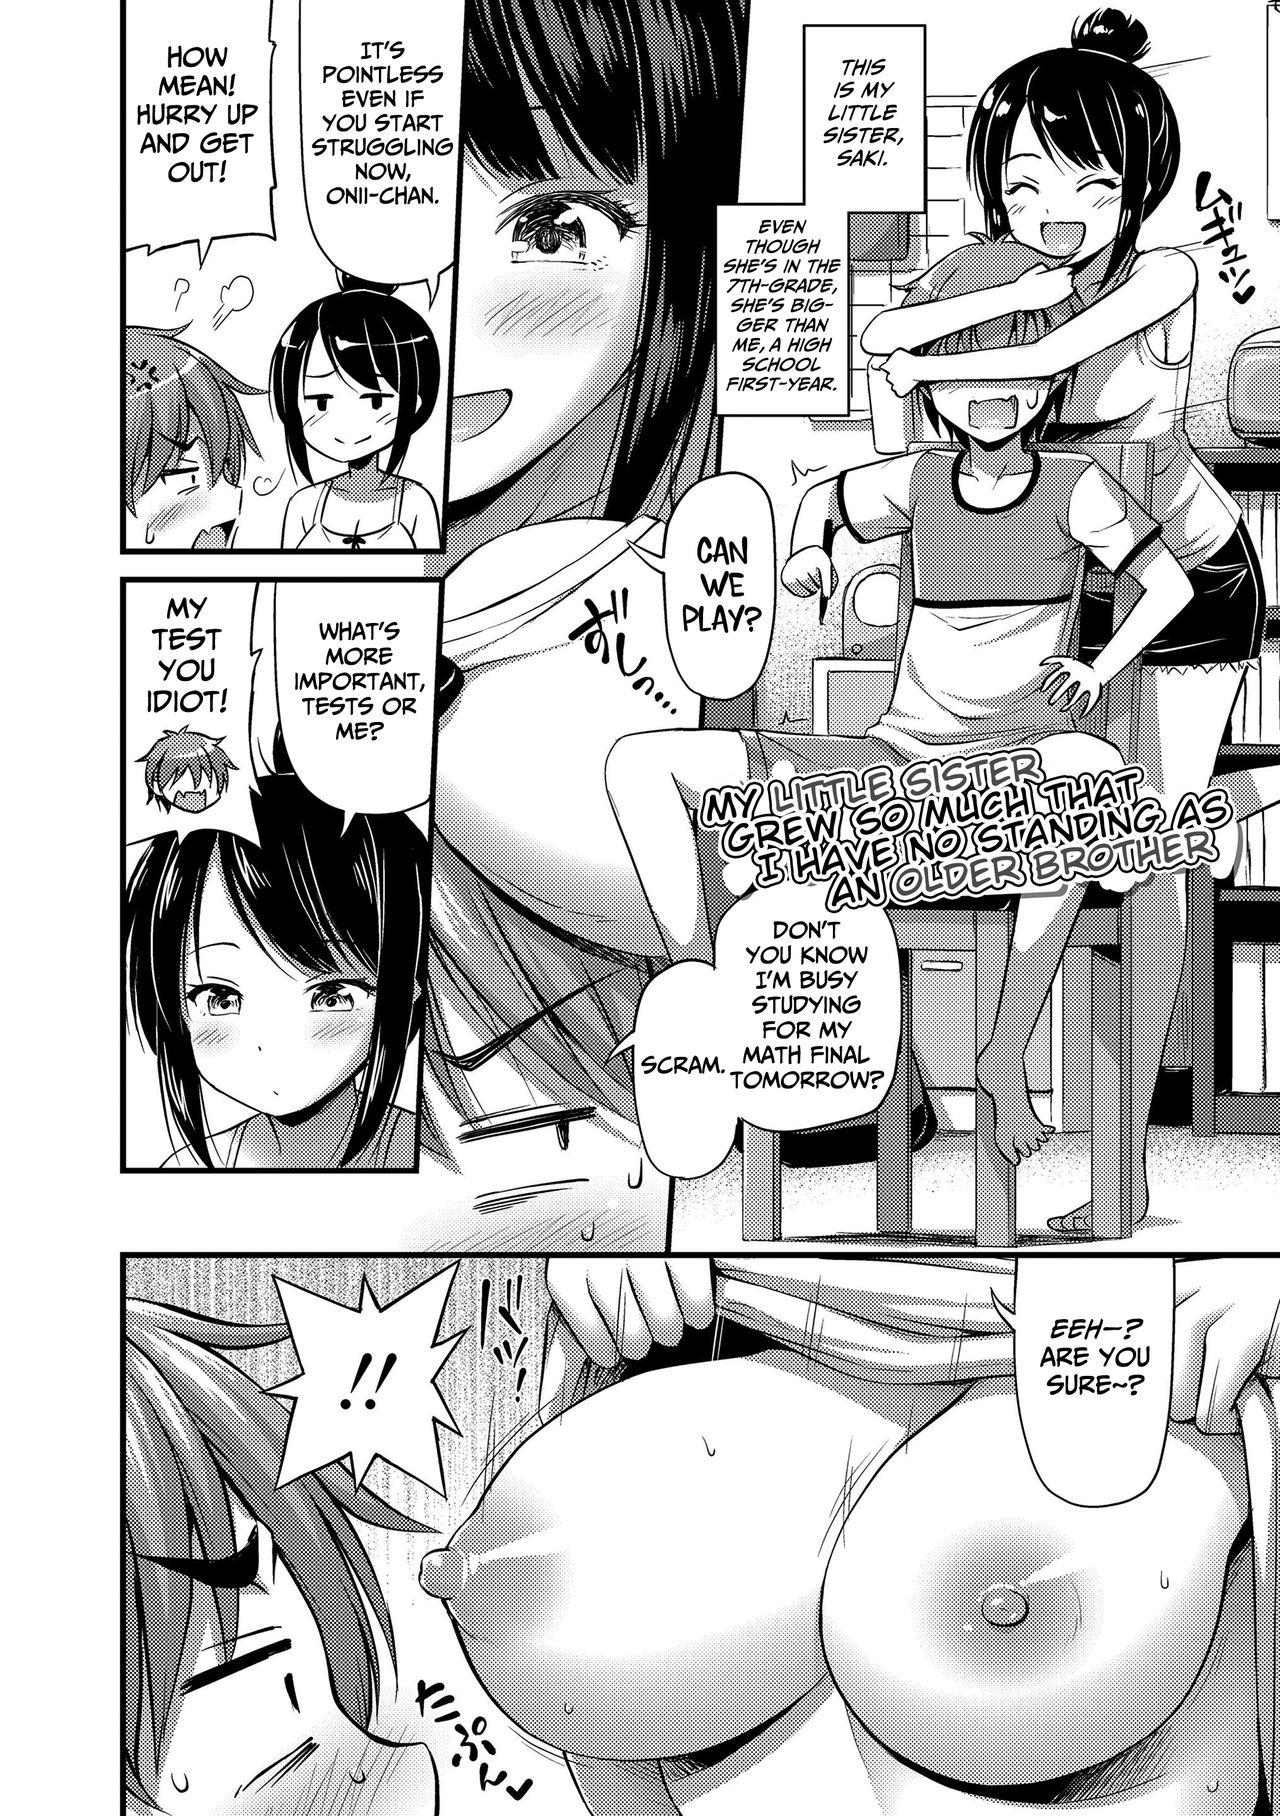 Lezbi Imouto ga Sodachi Sugite Ani no Tachiba ga Nai | My Little Sister Grew So Much That I Have No Standing as an Older Brother Sucking Cock - Page 2